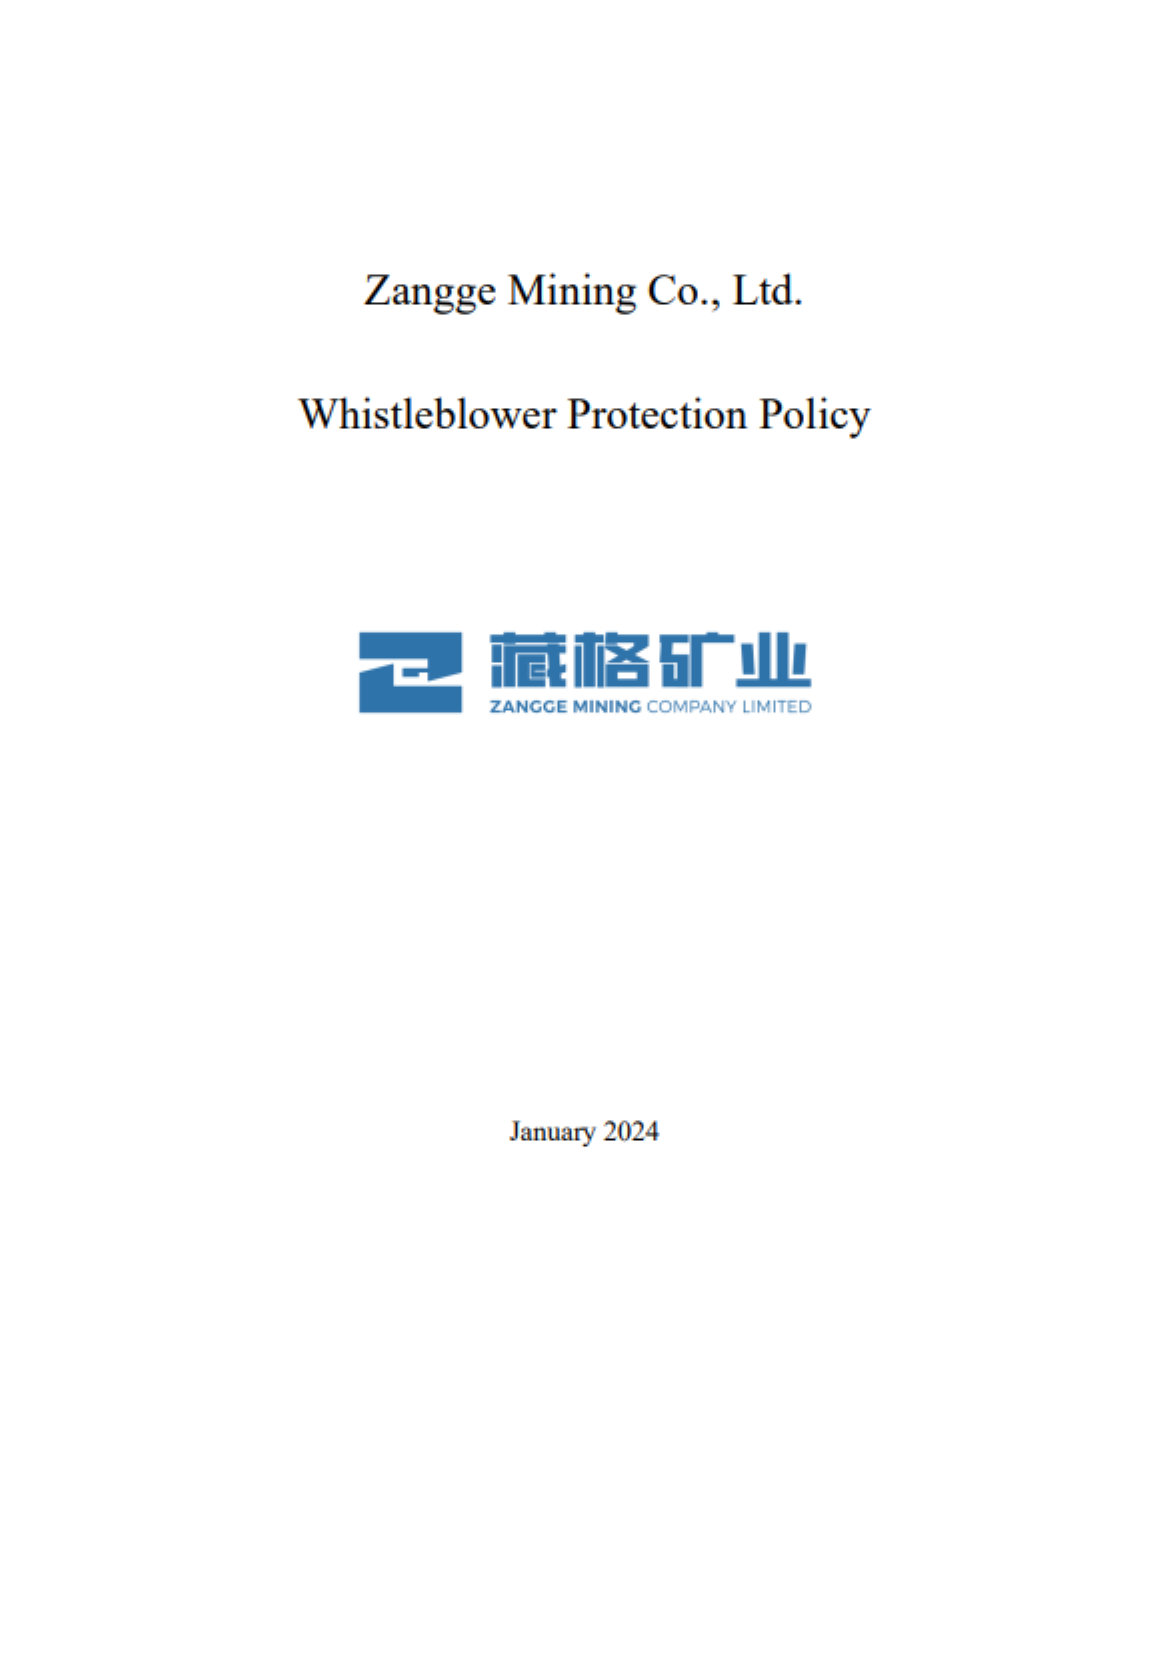 Whistleblower Protection Policy of Zangge Mining Co., Ltd.